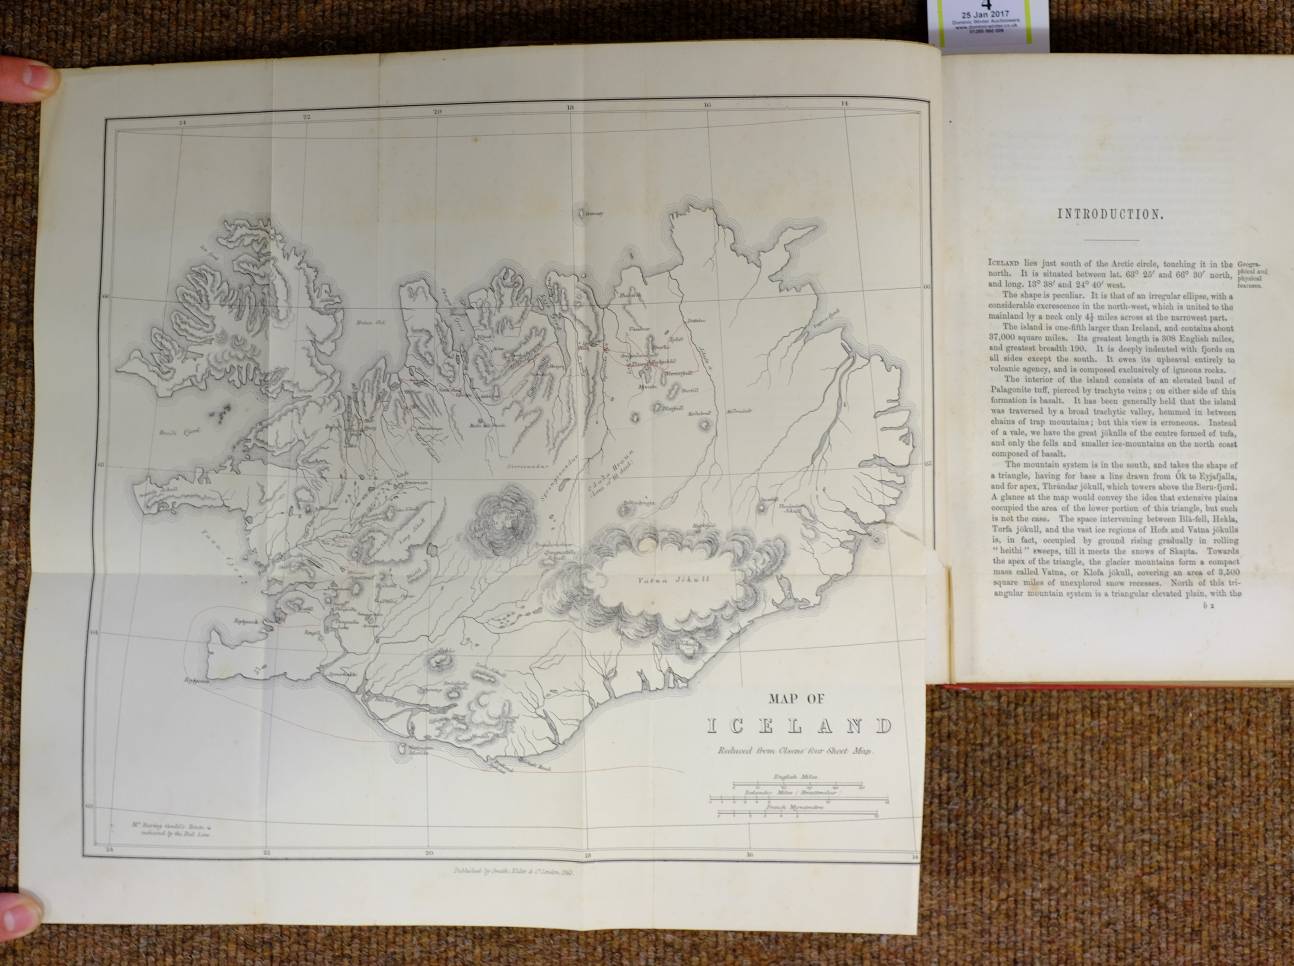 Baring-Gould (Sabine). Iceland: Its Scenes and Sagas, 1st edition, 1863, folding lithograph map, - Image 4 of 6